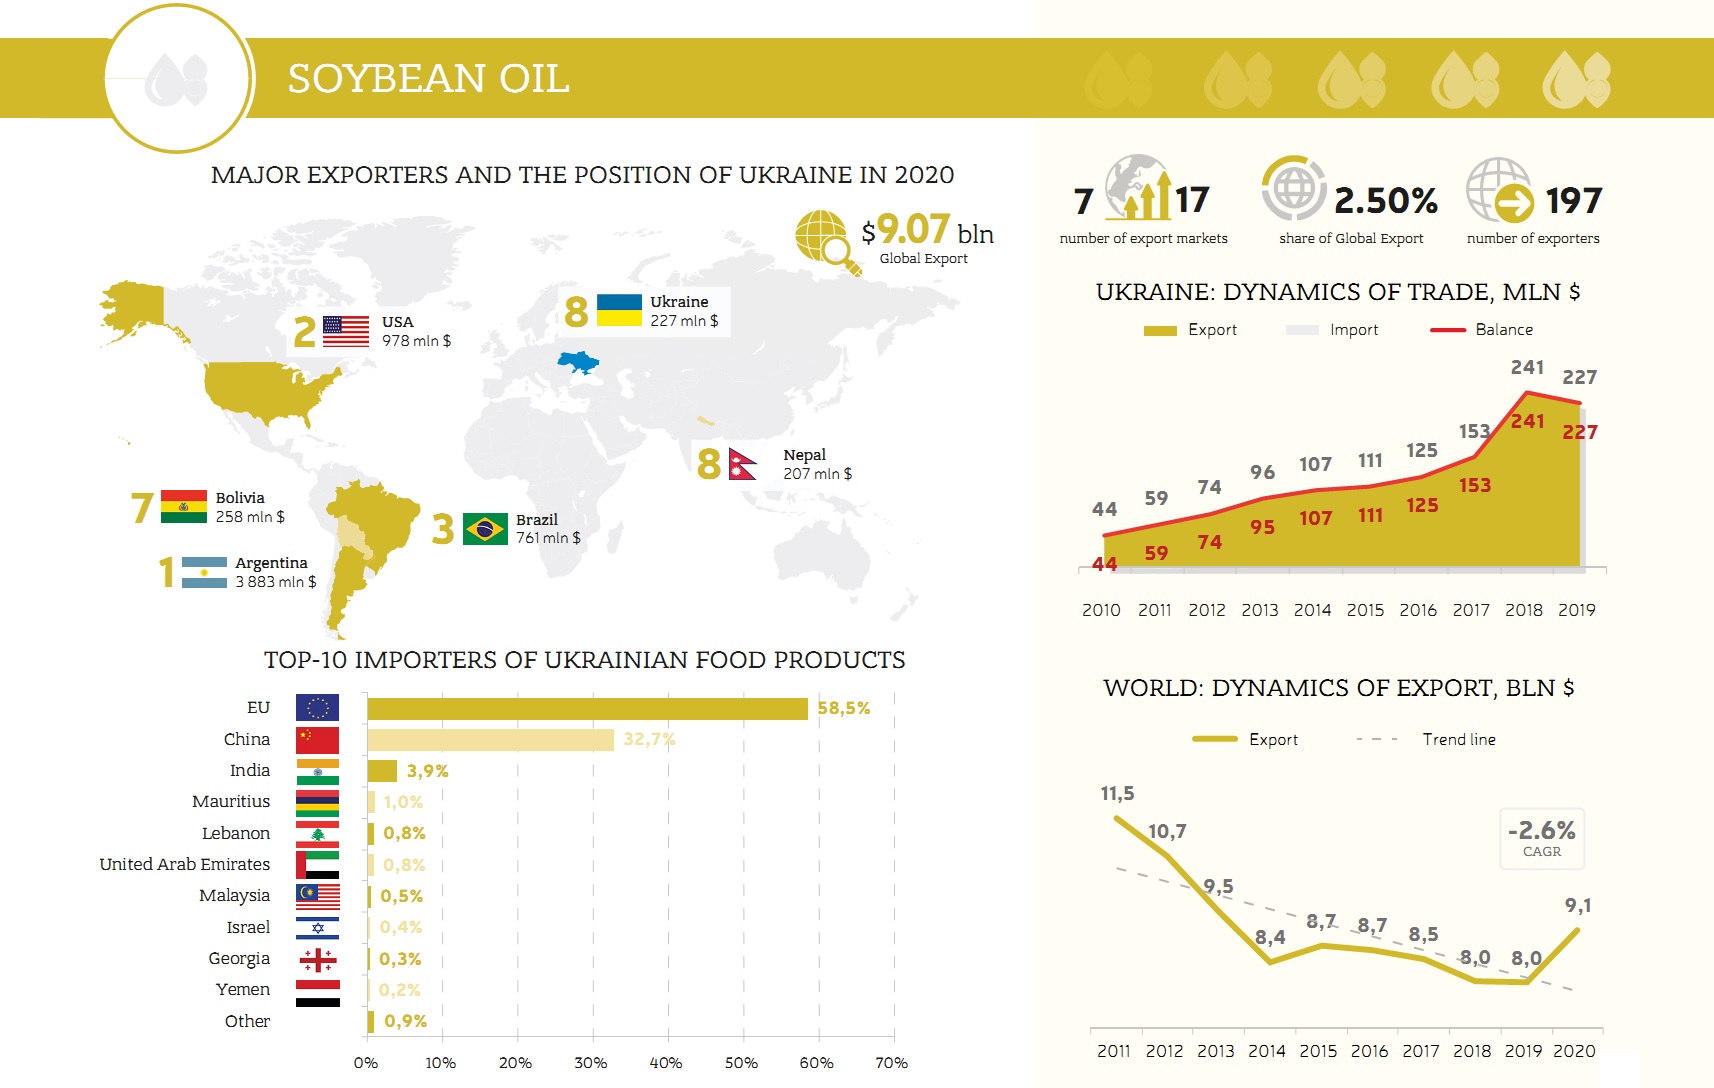 Soybean oil export from Ukraine (click for higher resolution). Source: UBTA